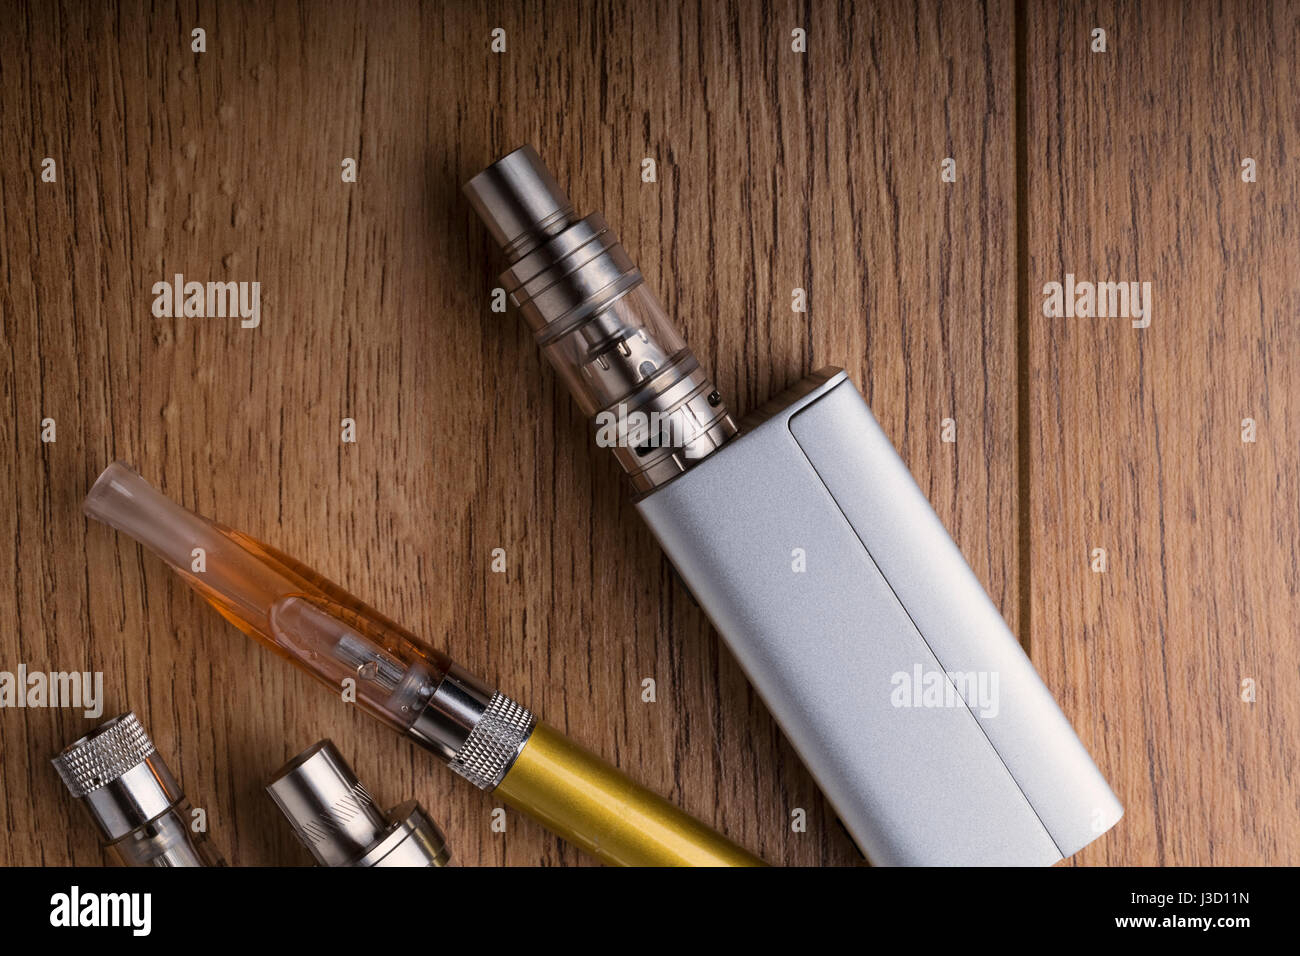 Isolated vaping devices or electronic cigarette over a wooden background. Stock Photo